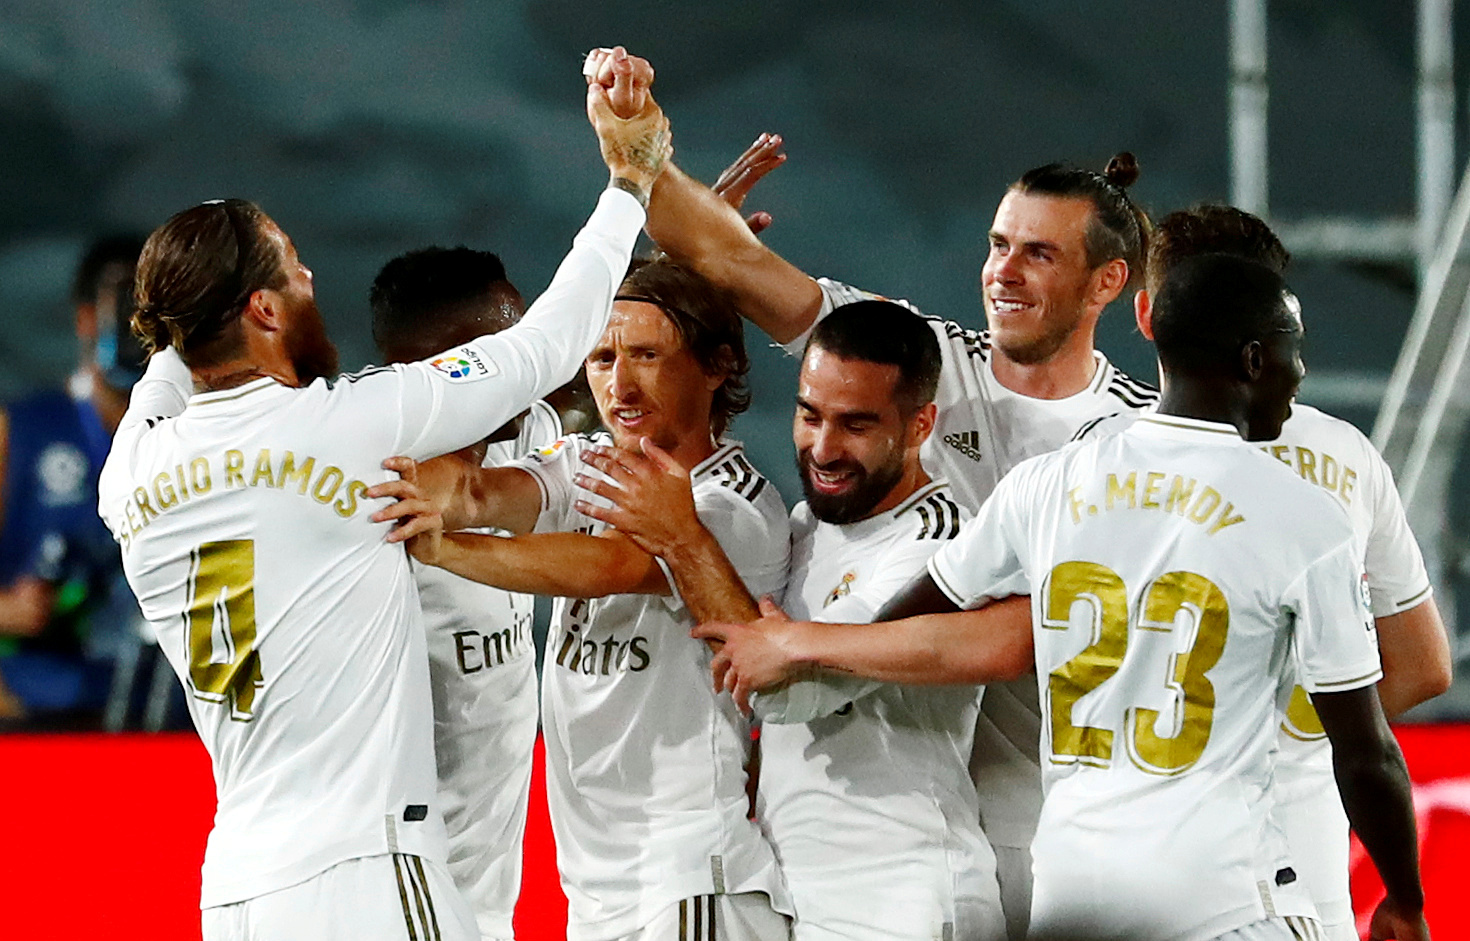 Madrid's Sergio Ramos celebrates scoring their second goal with teammates, as play resumes behind closed doors following the outbreak of the coronavirus disease (COVID-19). Photo: Reuters